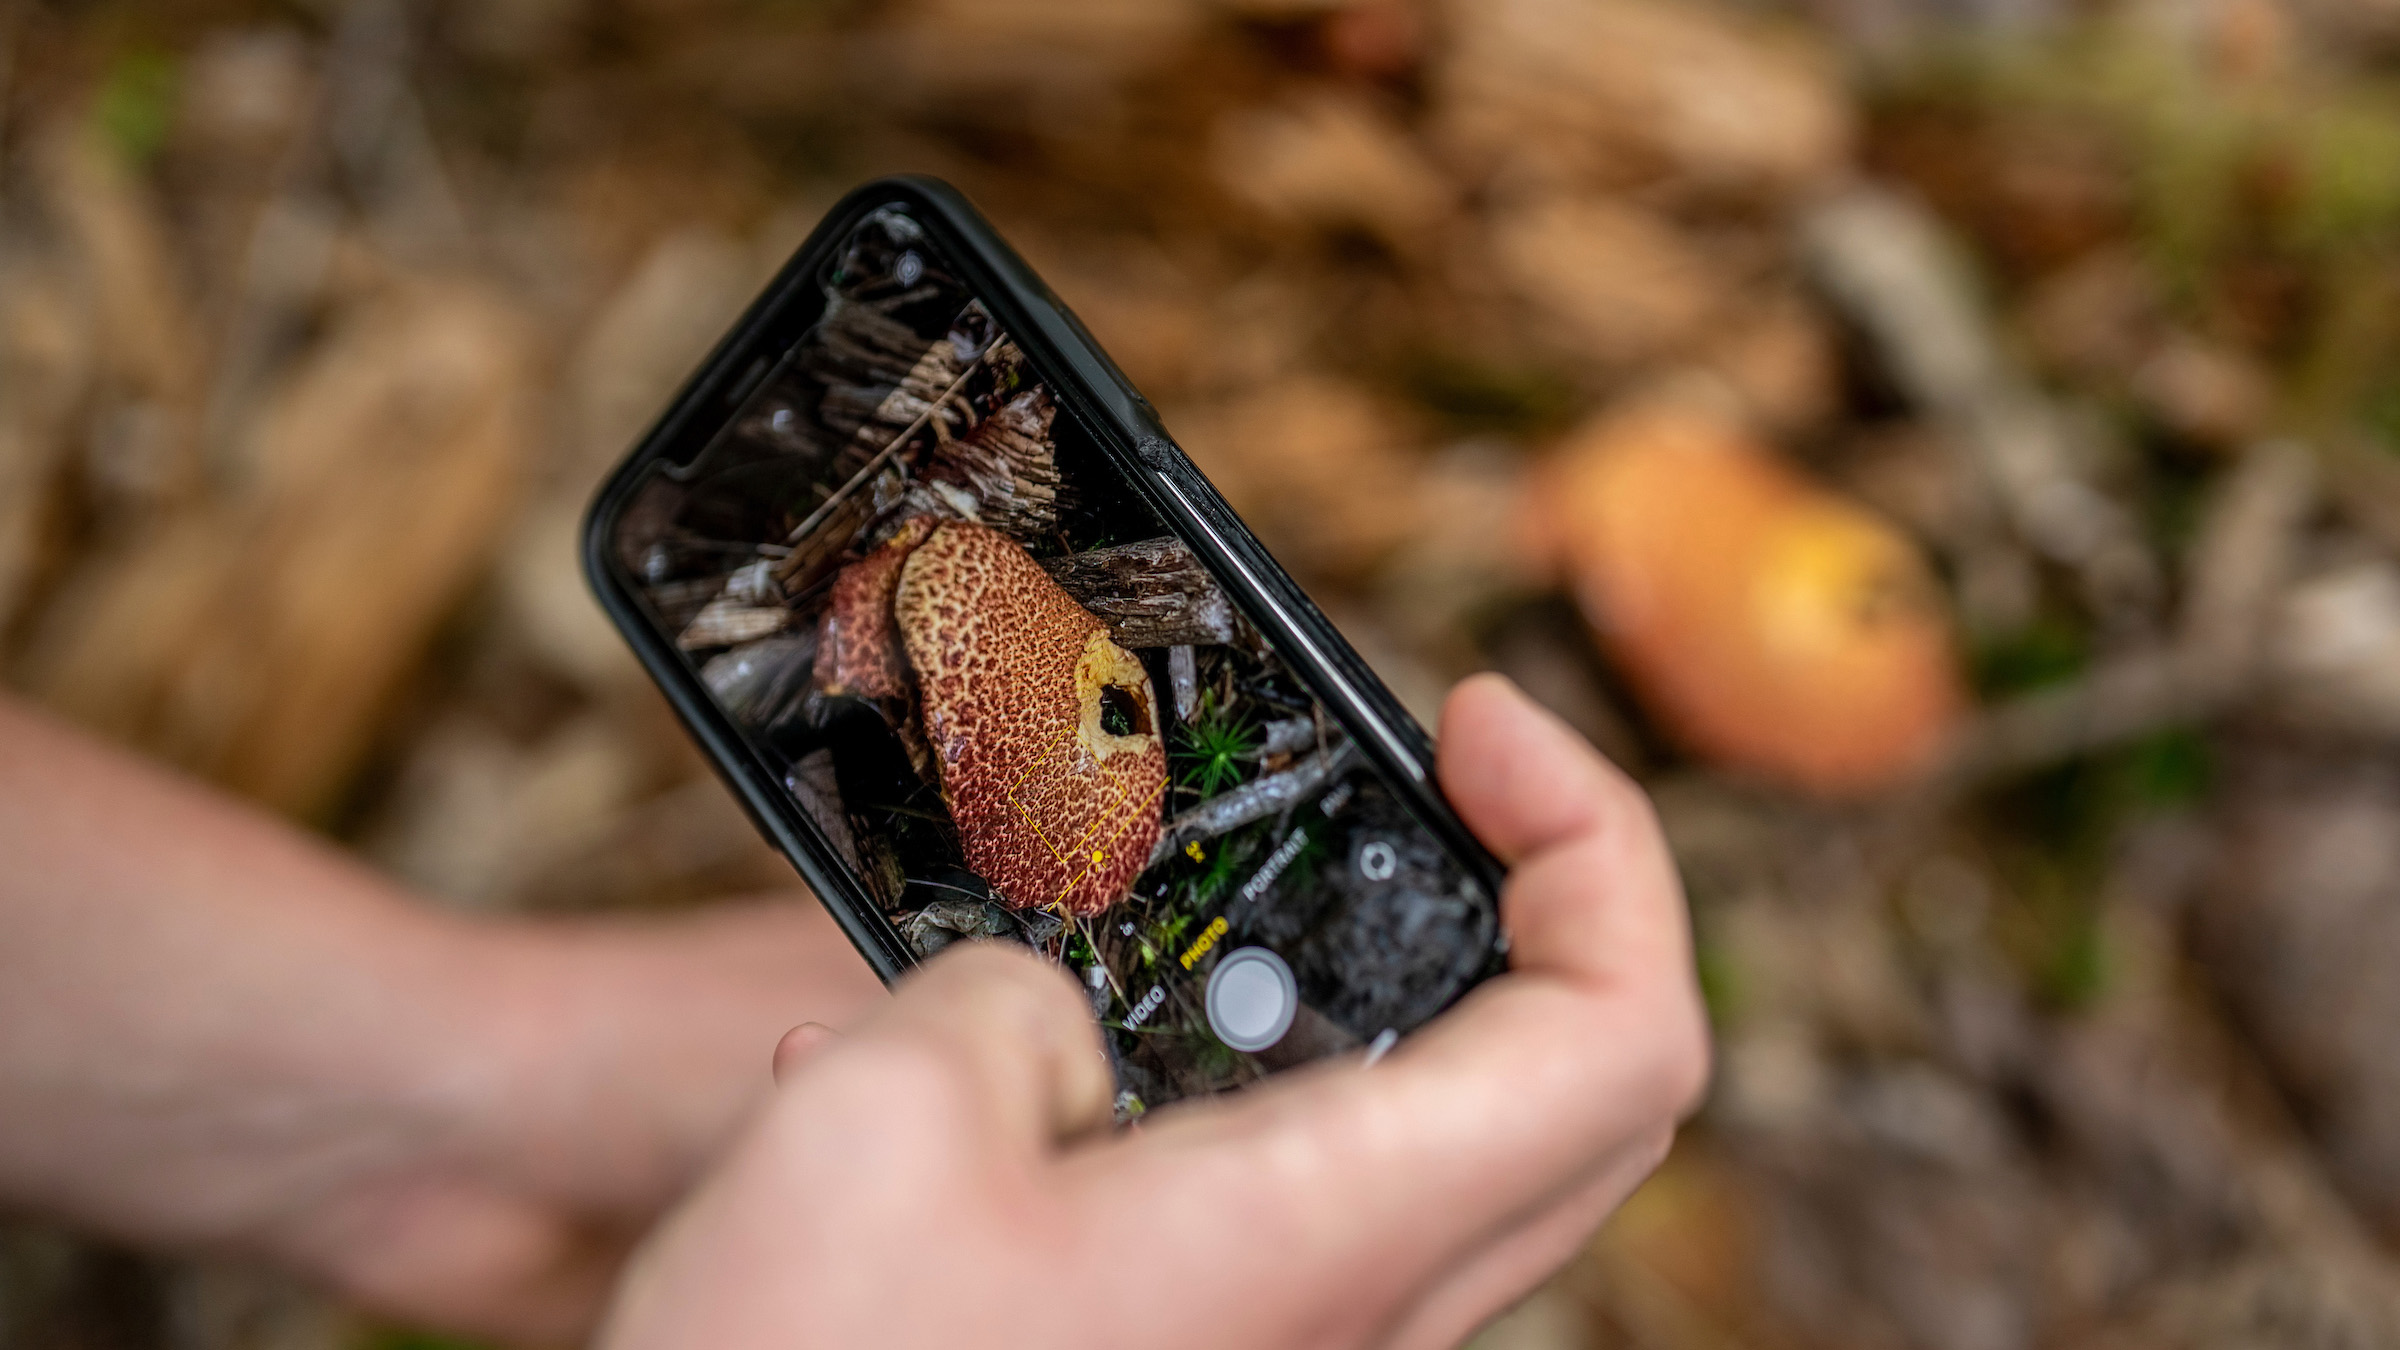 A person holds a phone in camera mode. The camera shows a mushrooms and a forest floor is in the background.